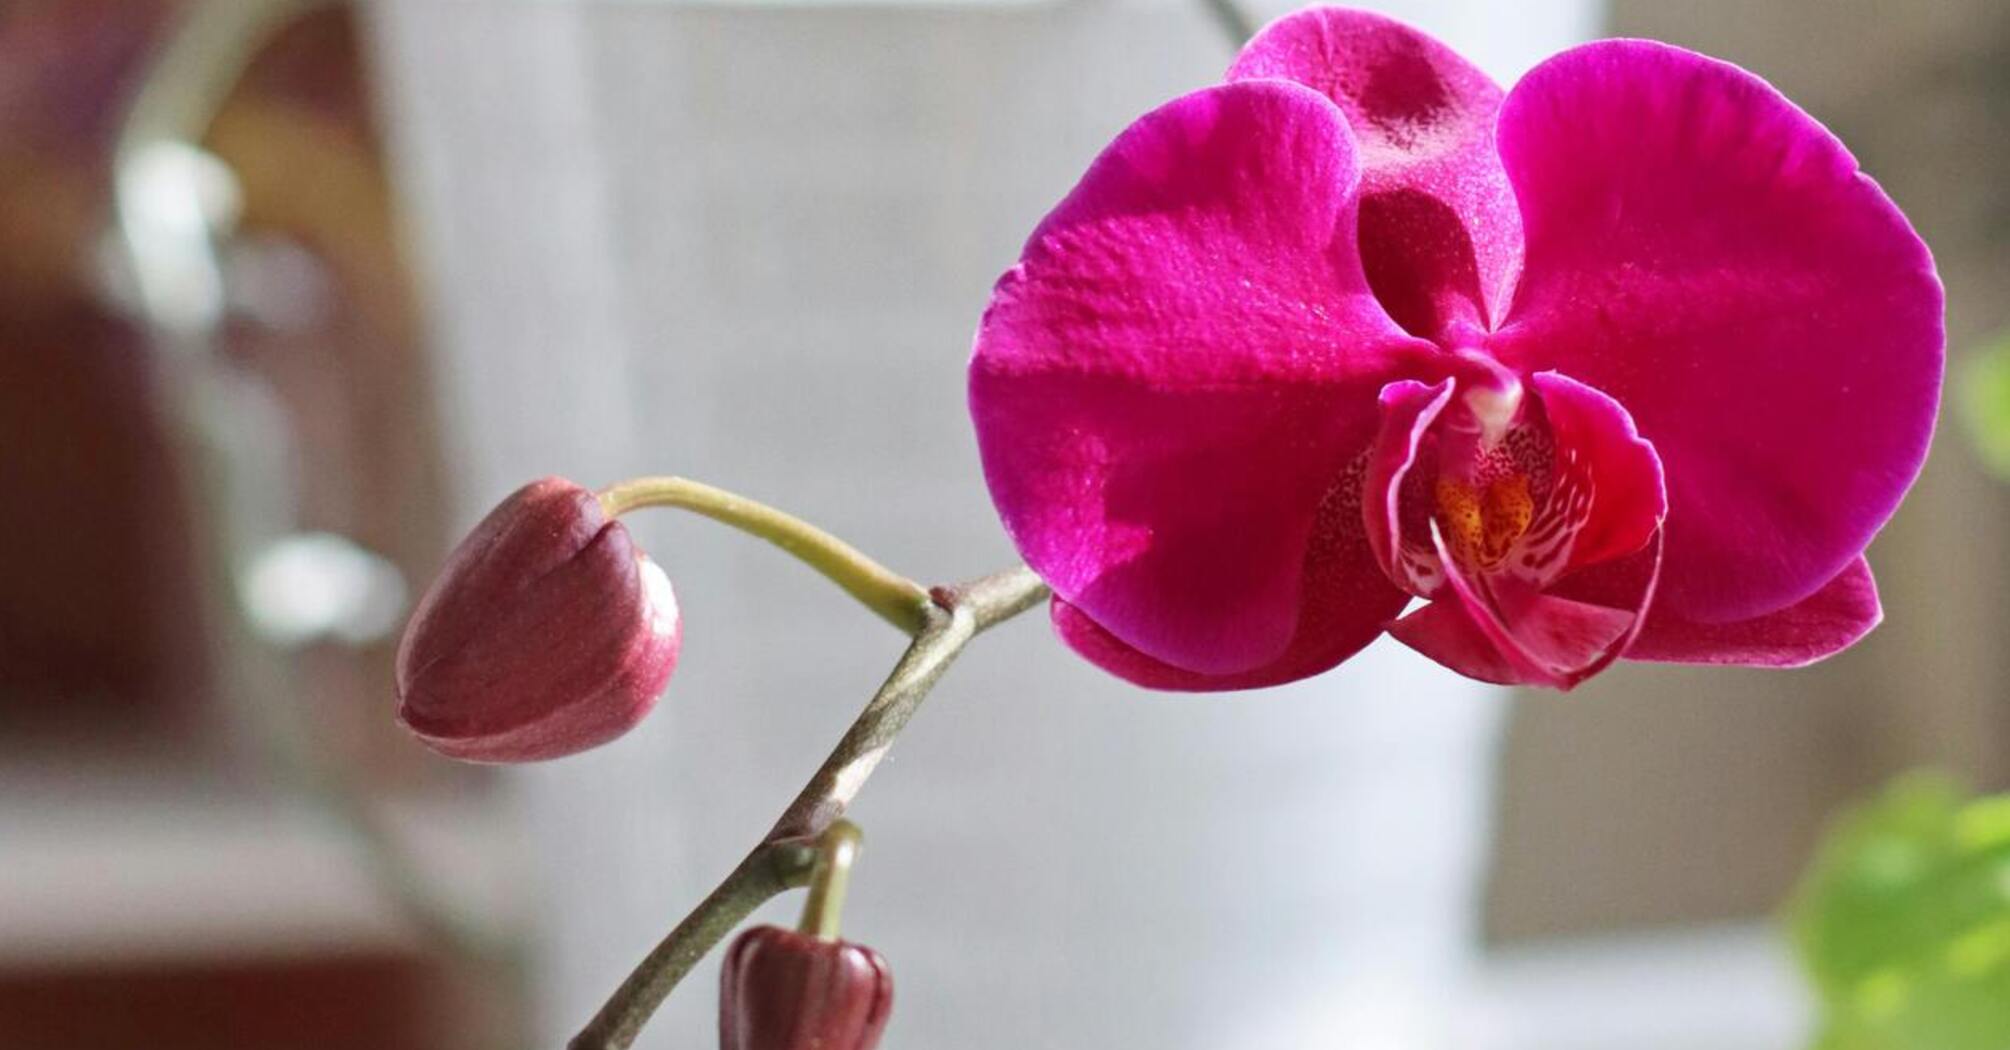 Milk, tea and eggshells: remedies to save an orchid from death and make it bloom